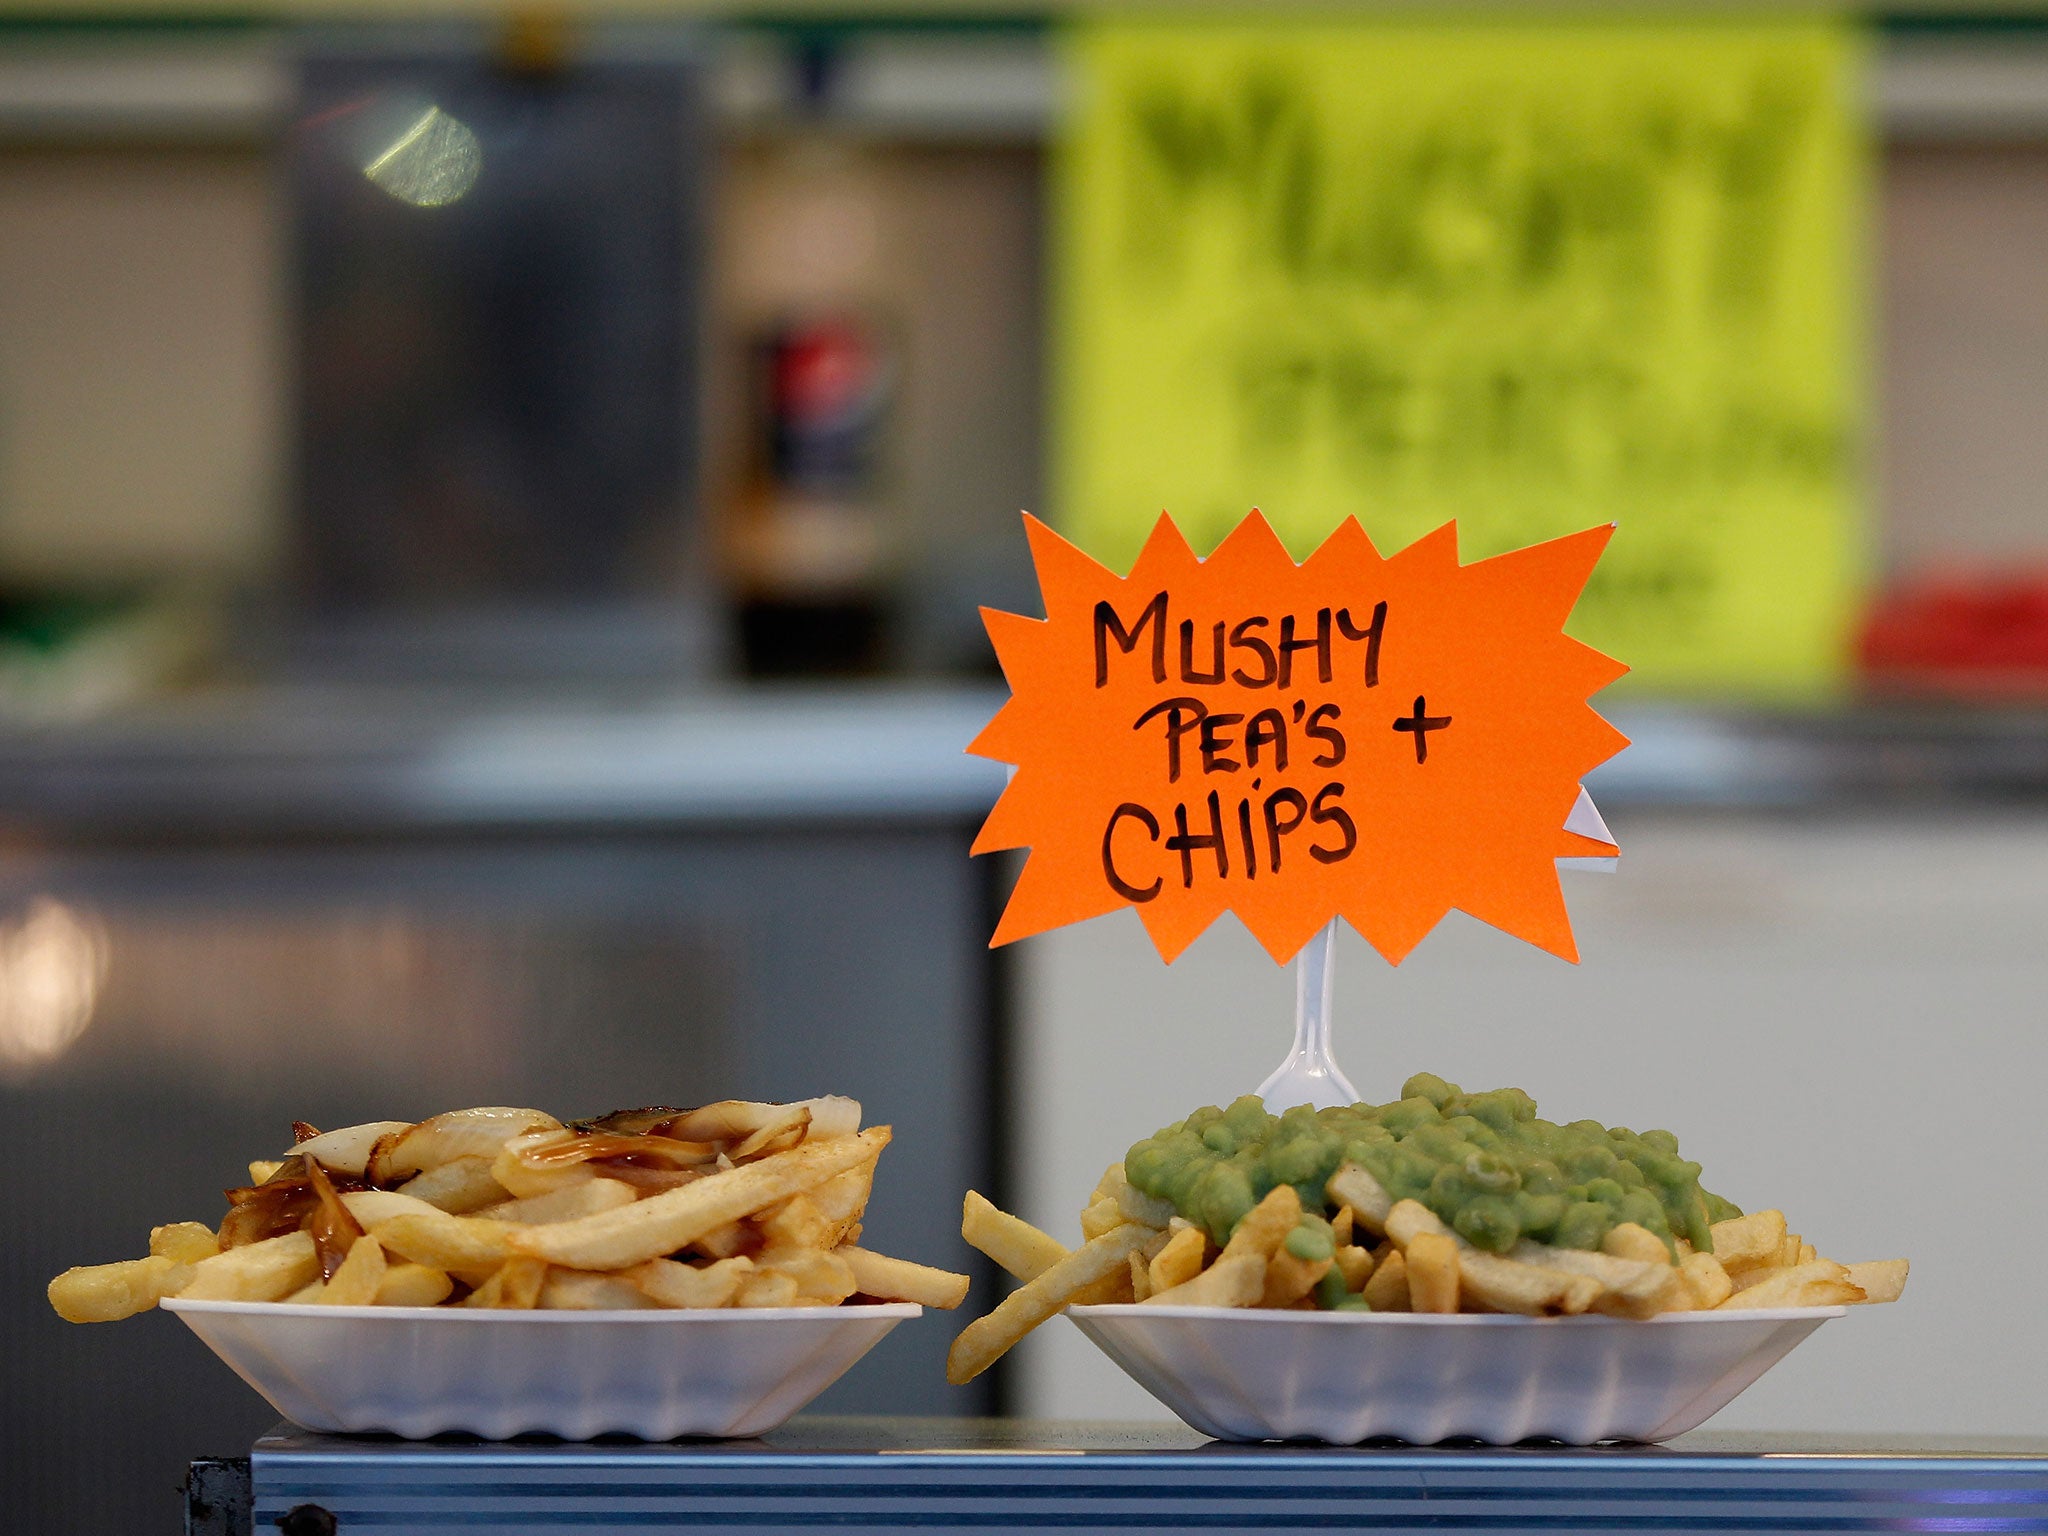 Mushy peas, chips and bad punctuation